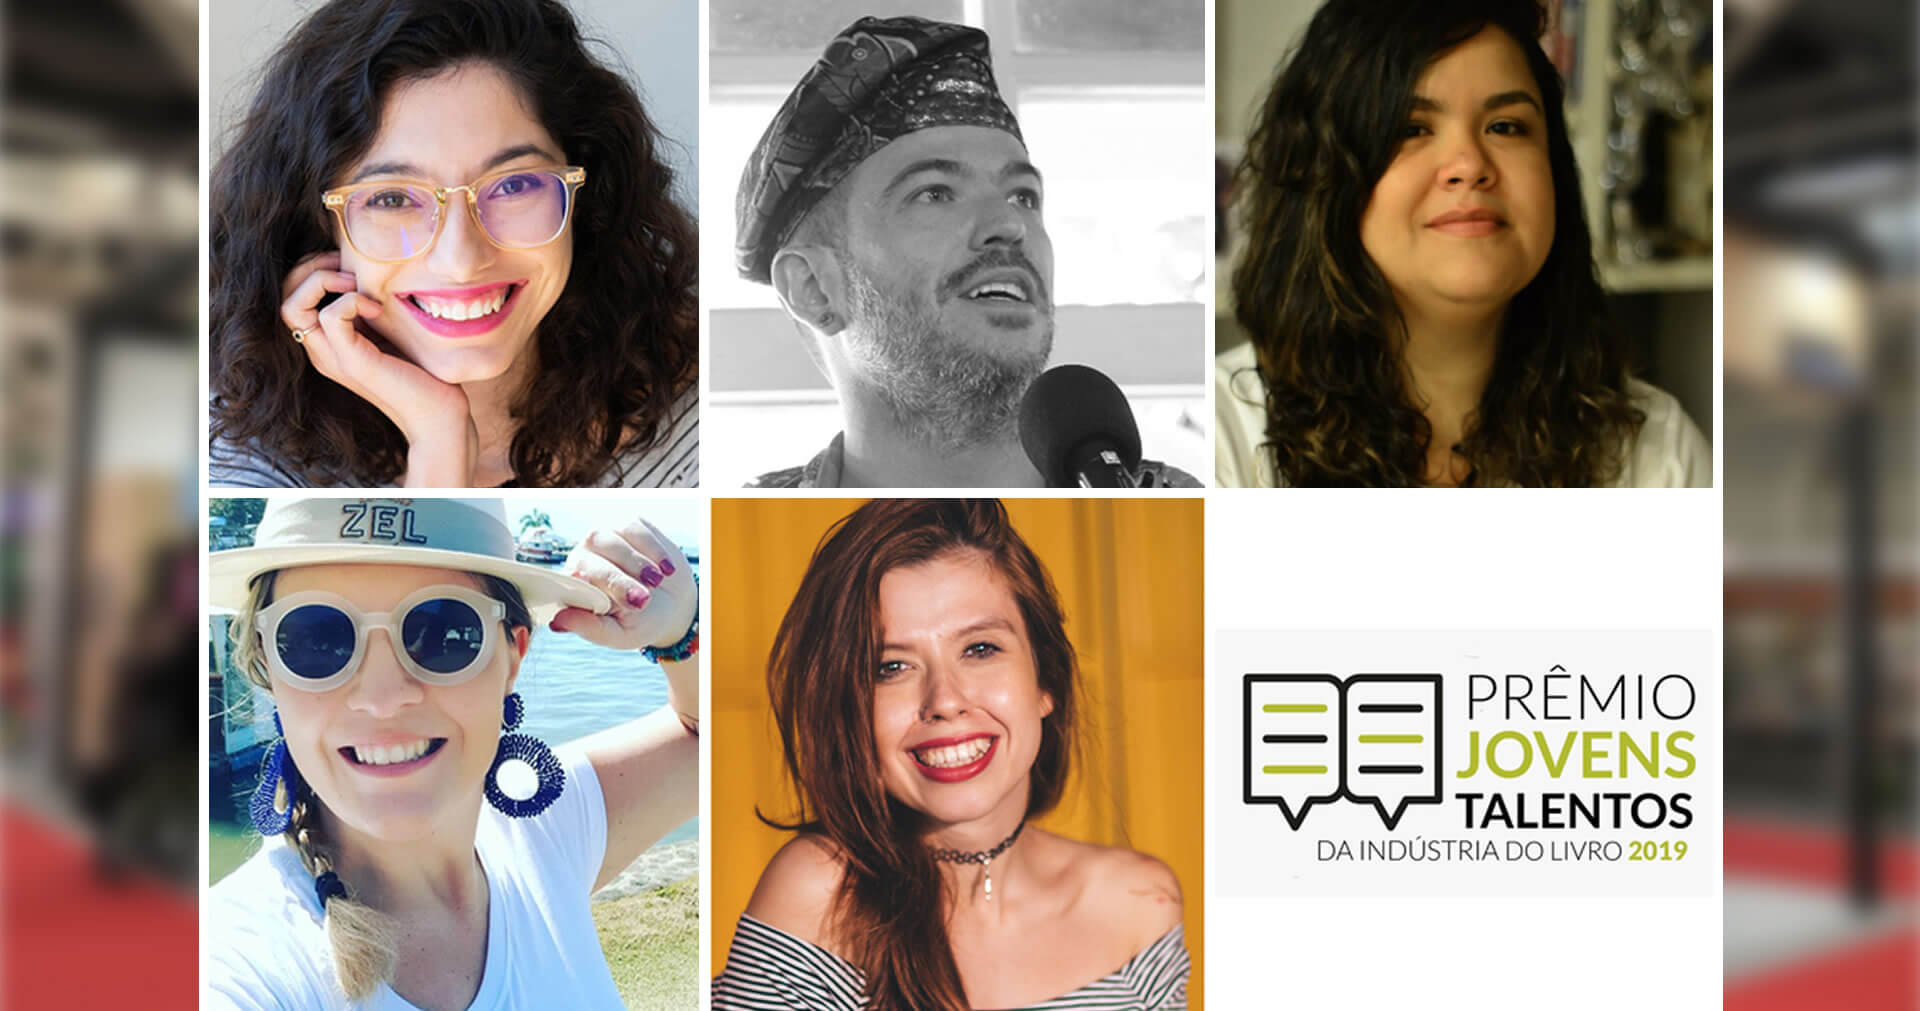 A Magia das Folhas | The PublishNewsYoung Talent Award presents professionals representing the renewal of the book market and the future of this industry.